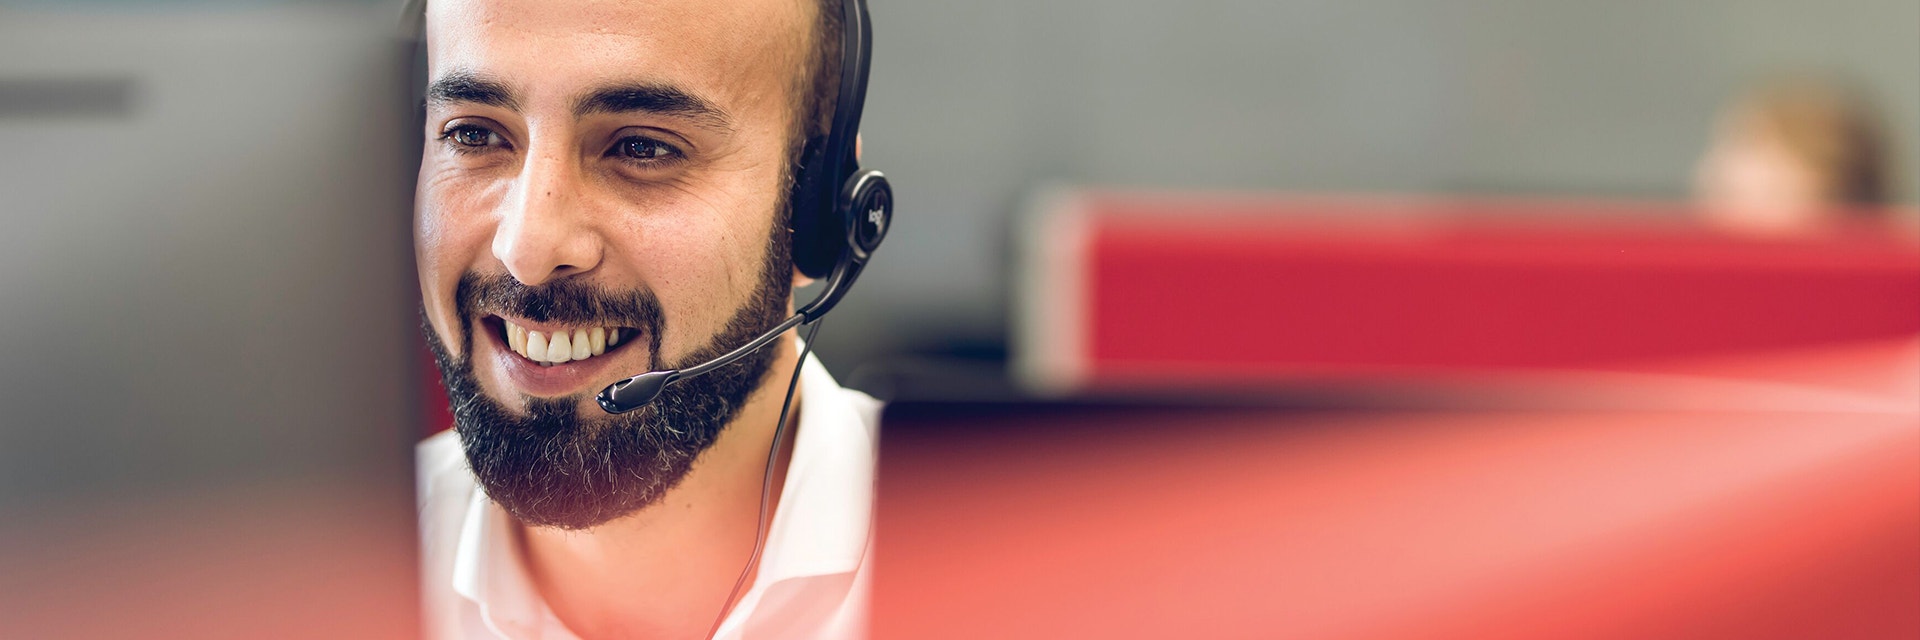 Customer support officer smiling while looking at a computer and wearing a headset